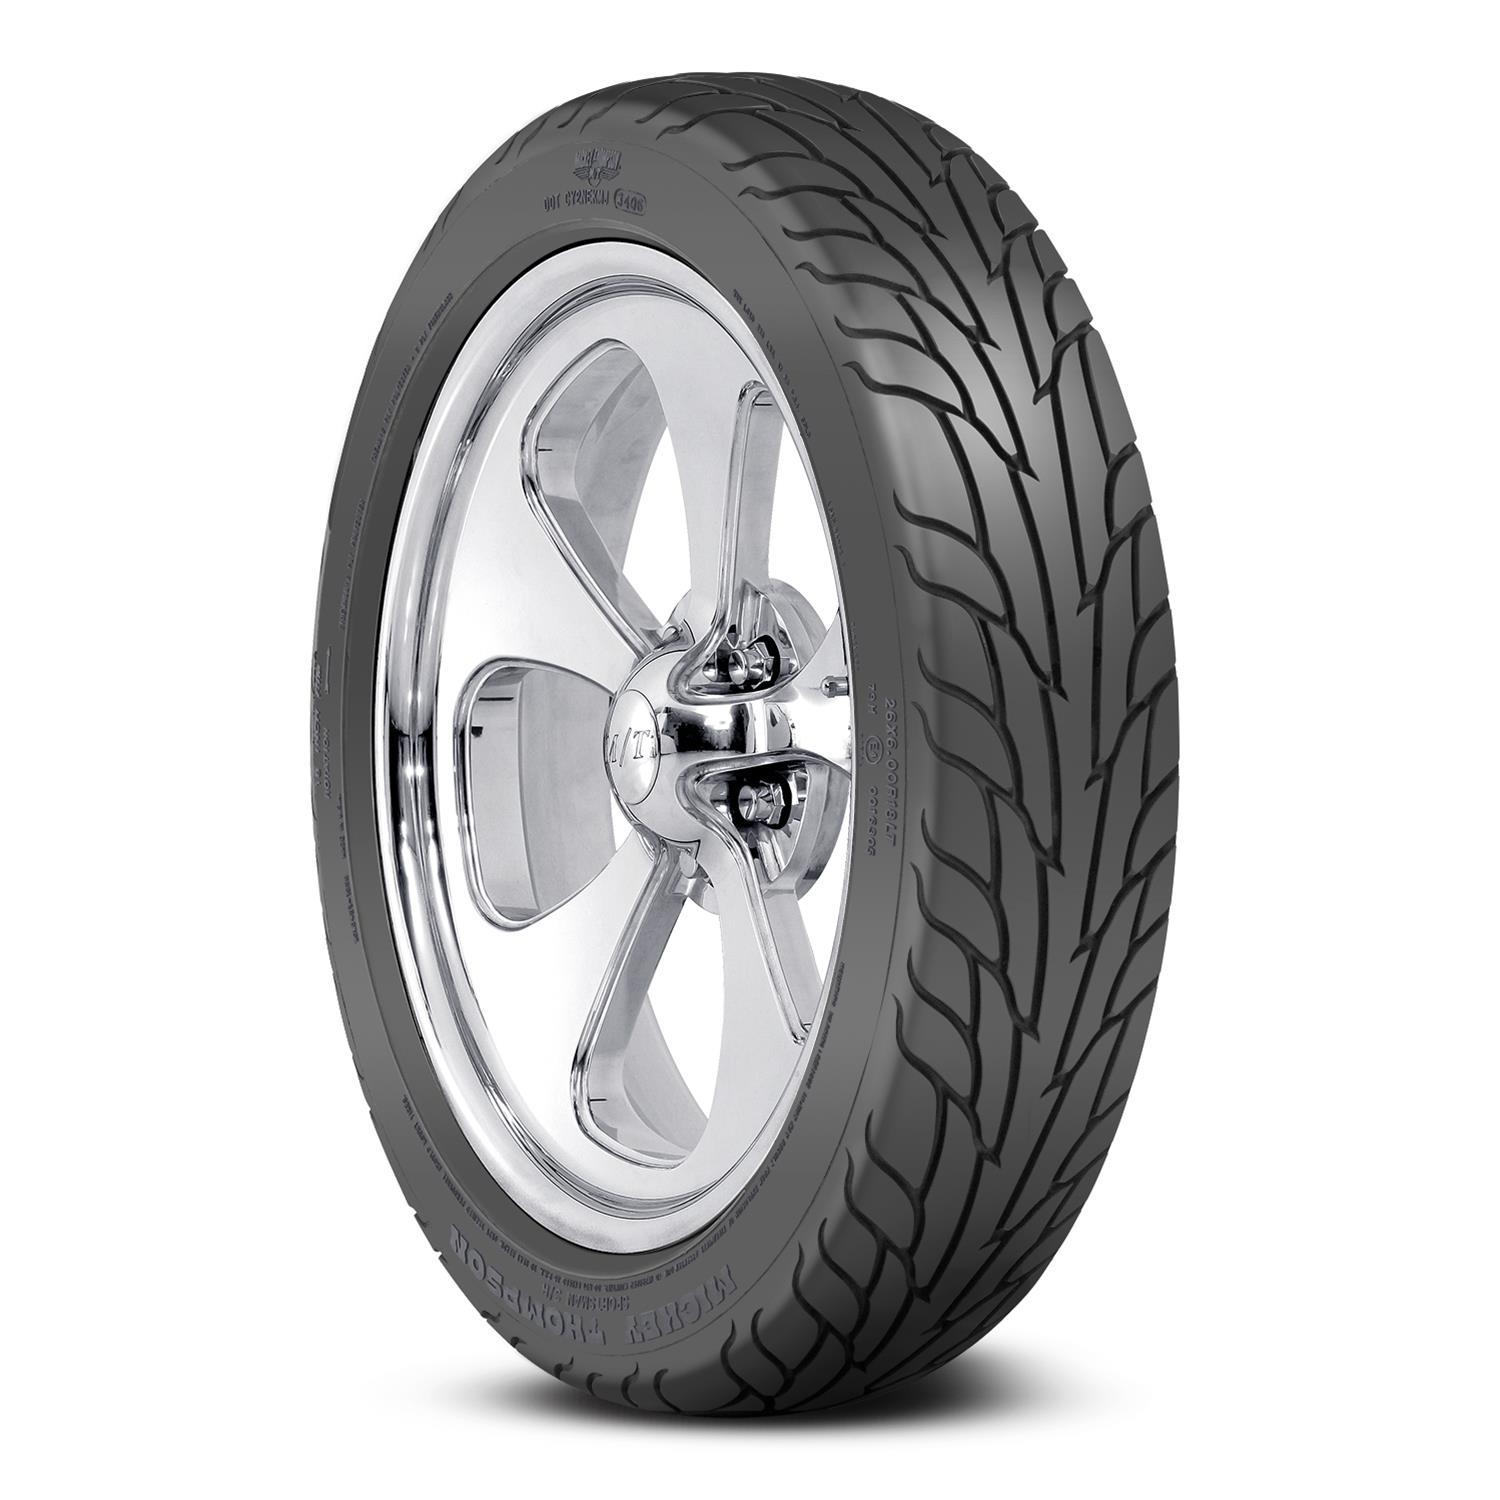 Mickey Thompson 26x6.00R-18LT Sportsman S/R Radial Tire Tires and Tubes Tires main image